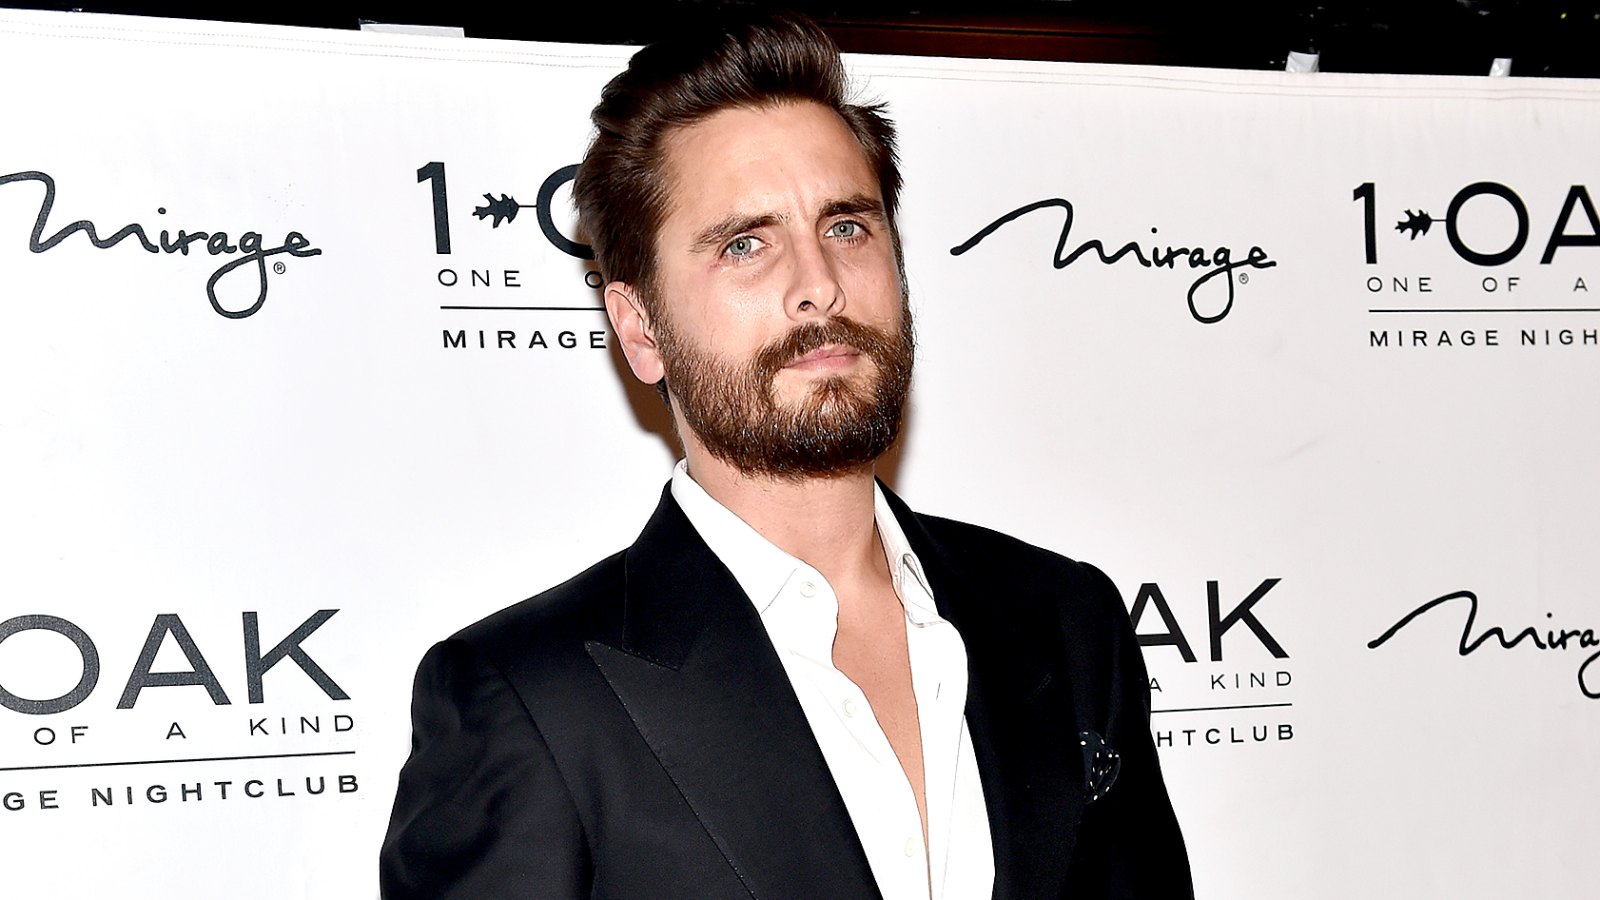 Scott Disick arrives at 1 OAK Nightclub at The Mirage Hotel & Casino to host a New Year's Eve celebration on December 31, 2015 in Las Vegas, Nevada.